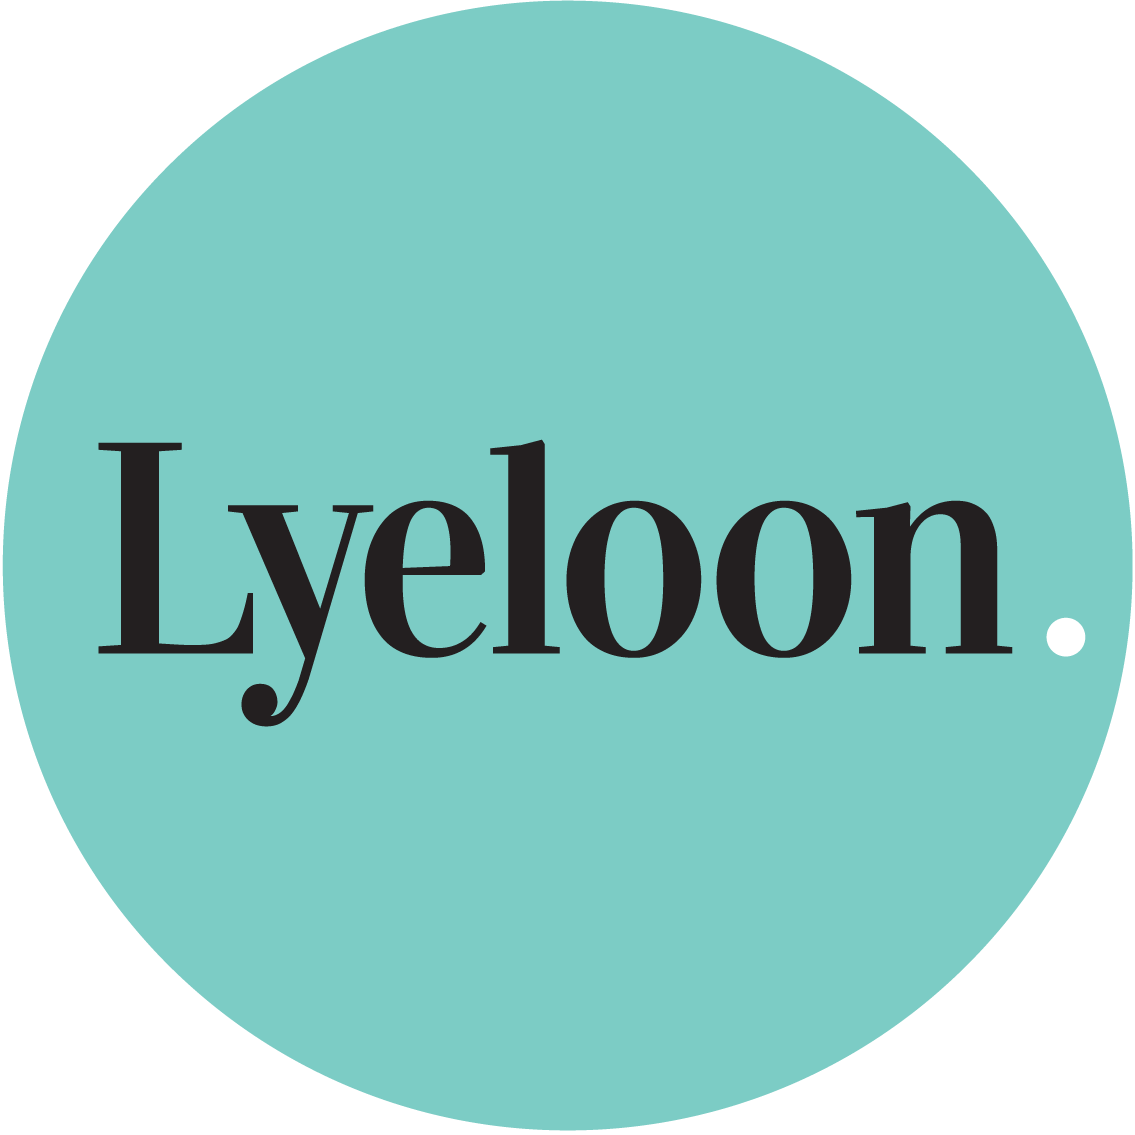 Lyeloon Limited